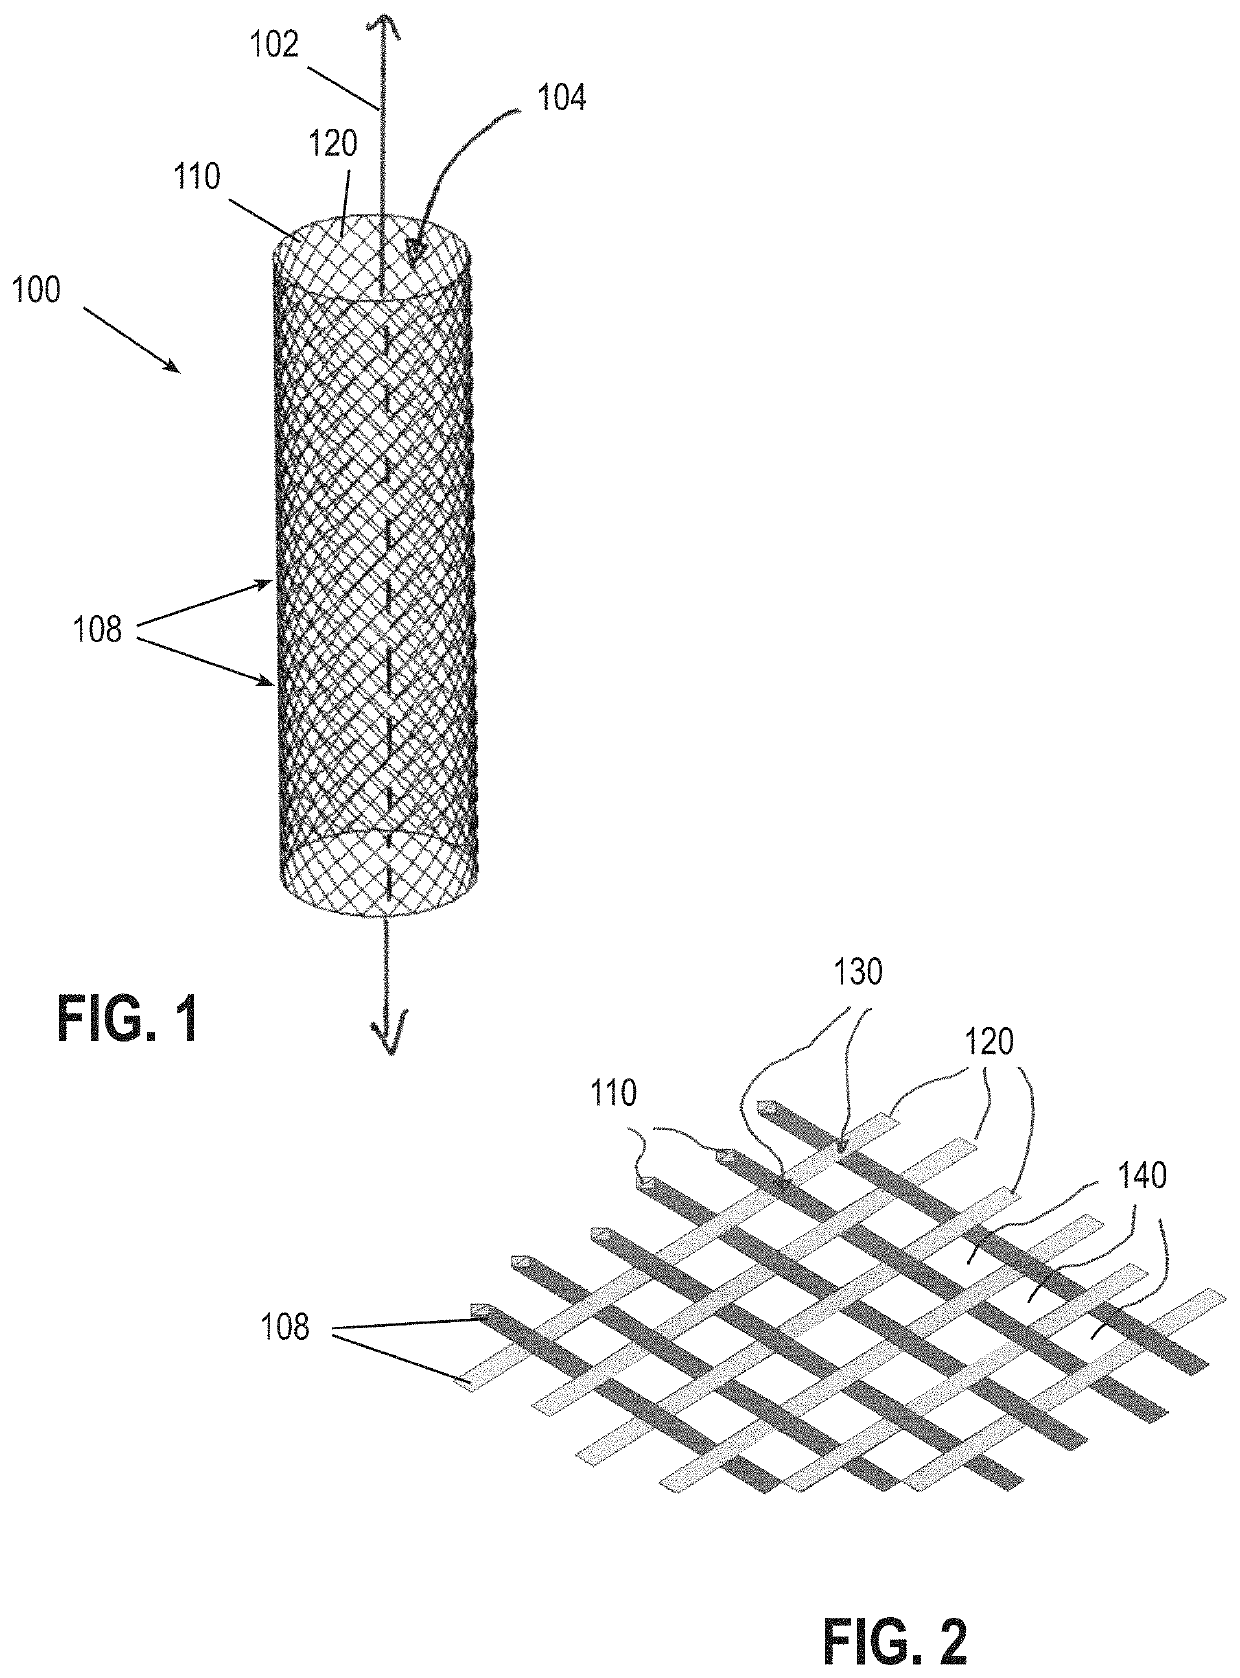 Multi-axially braided reinforcement sleeve for concrete columns and method for constructing concrete columns